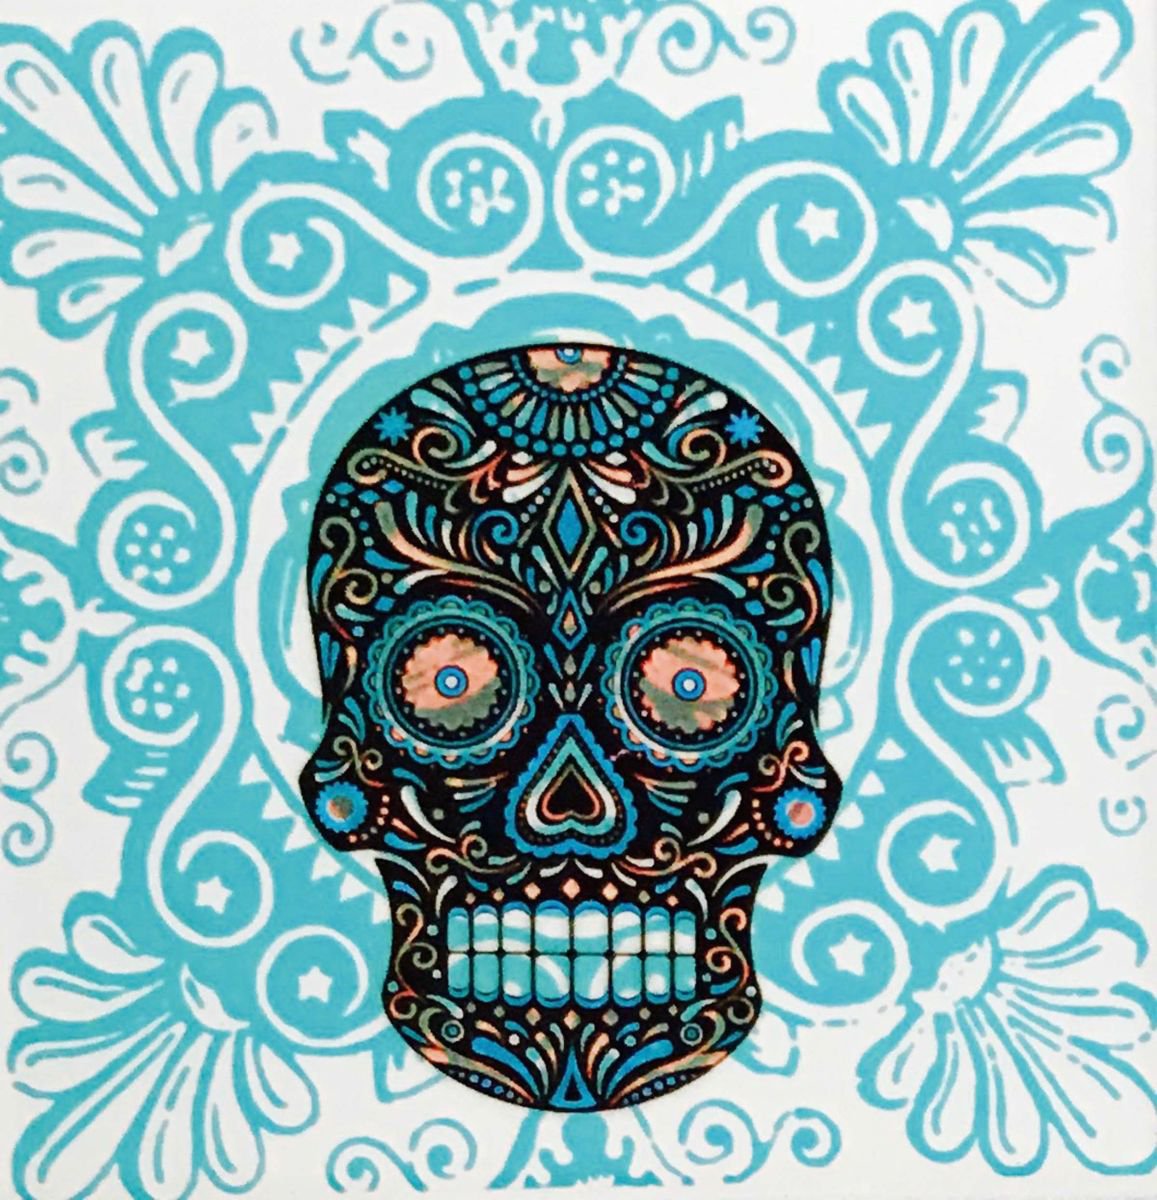 Blue Skull on Patterned background by Georgia Sawers